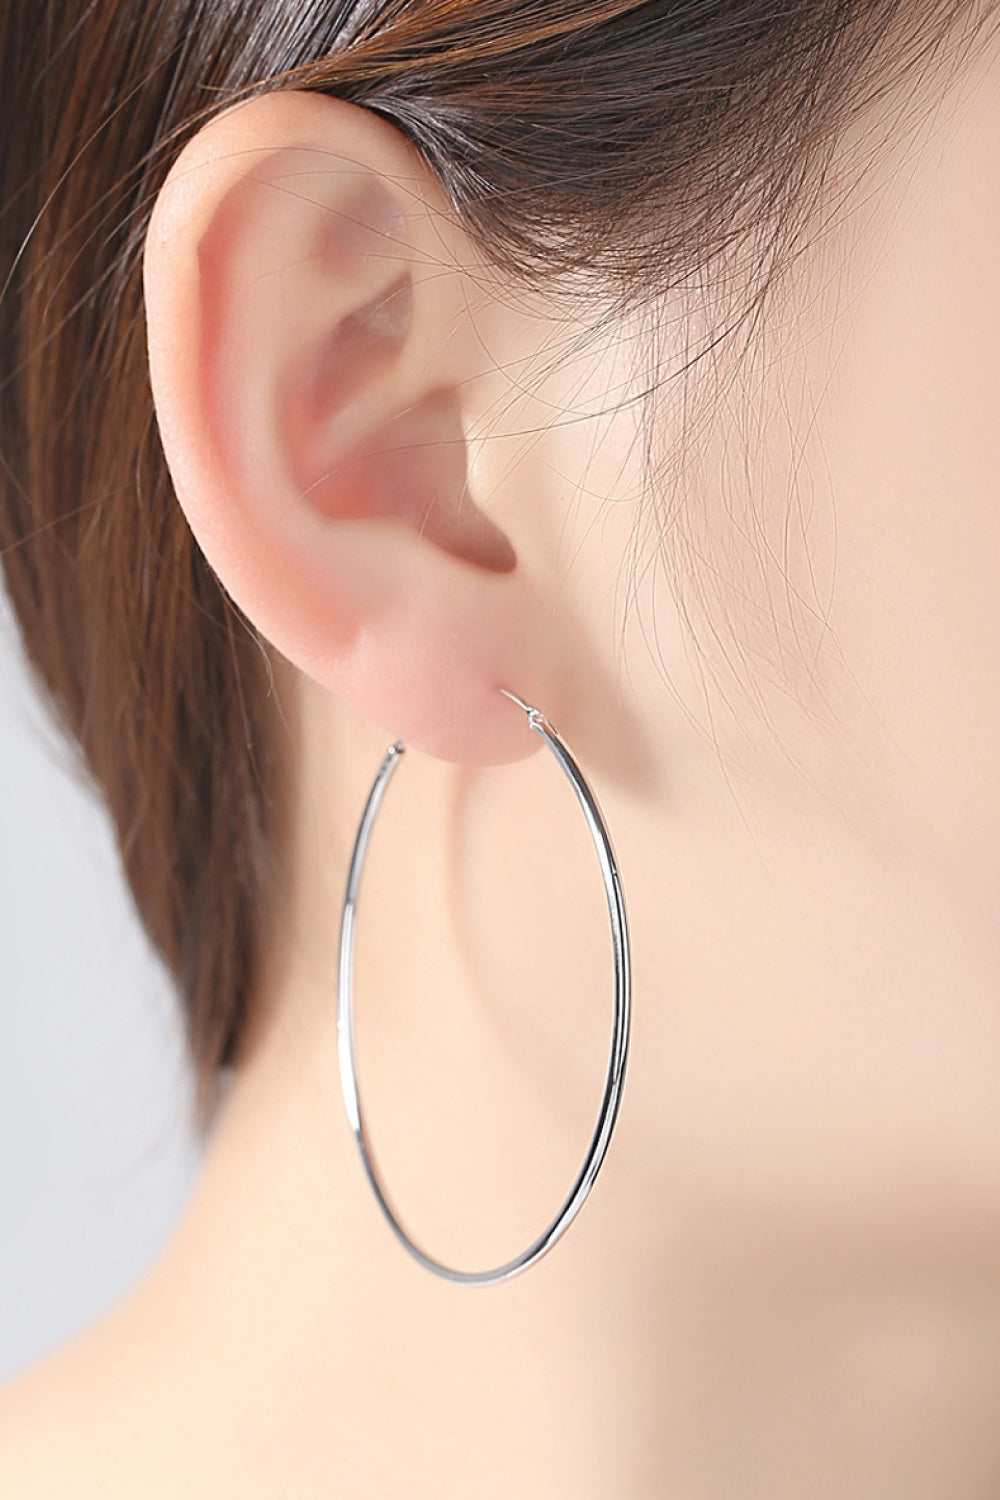 Graphite Stone 925 Sterling Silver Hoop Earrings | Hypoallergenic - Allergy Friendly - Naturally Free